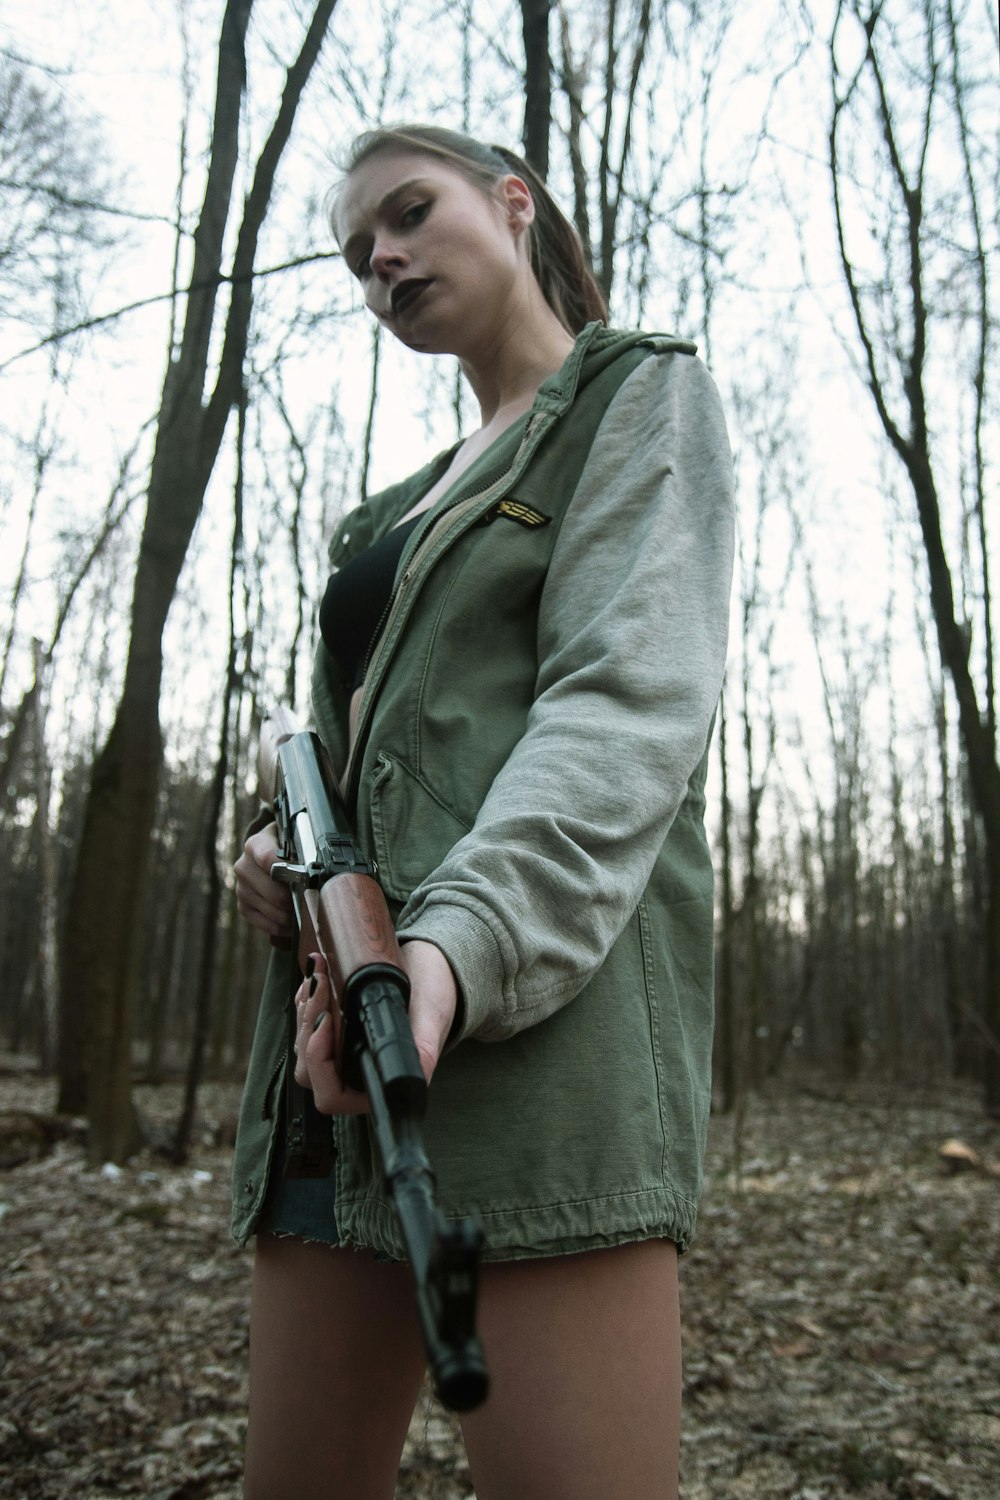 Army girl with ak-47